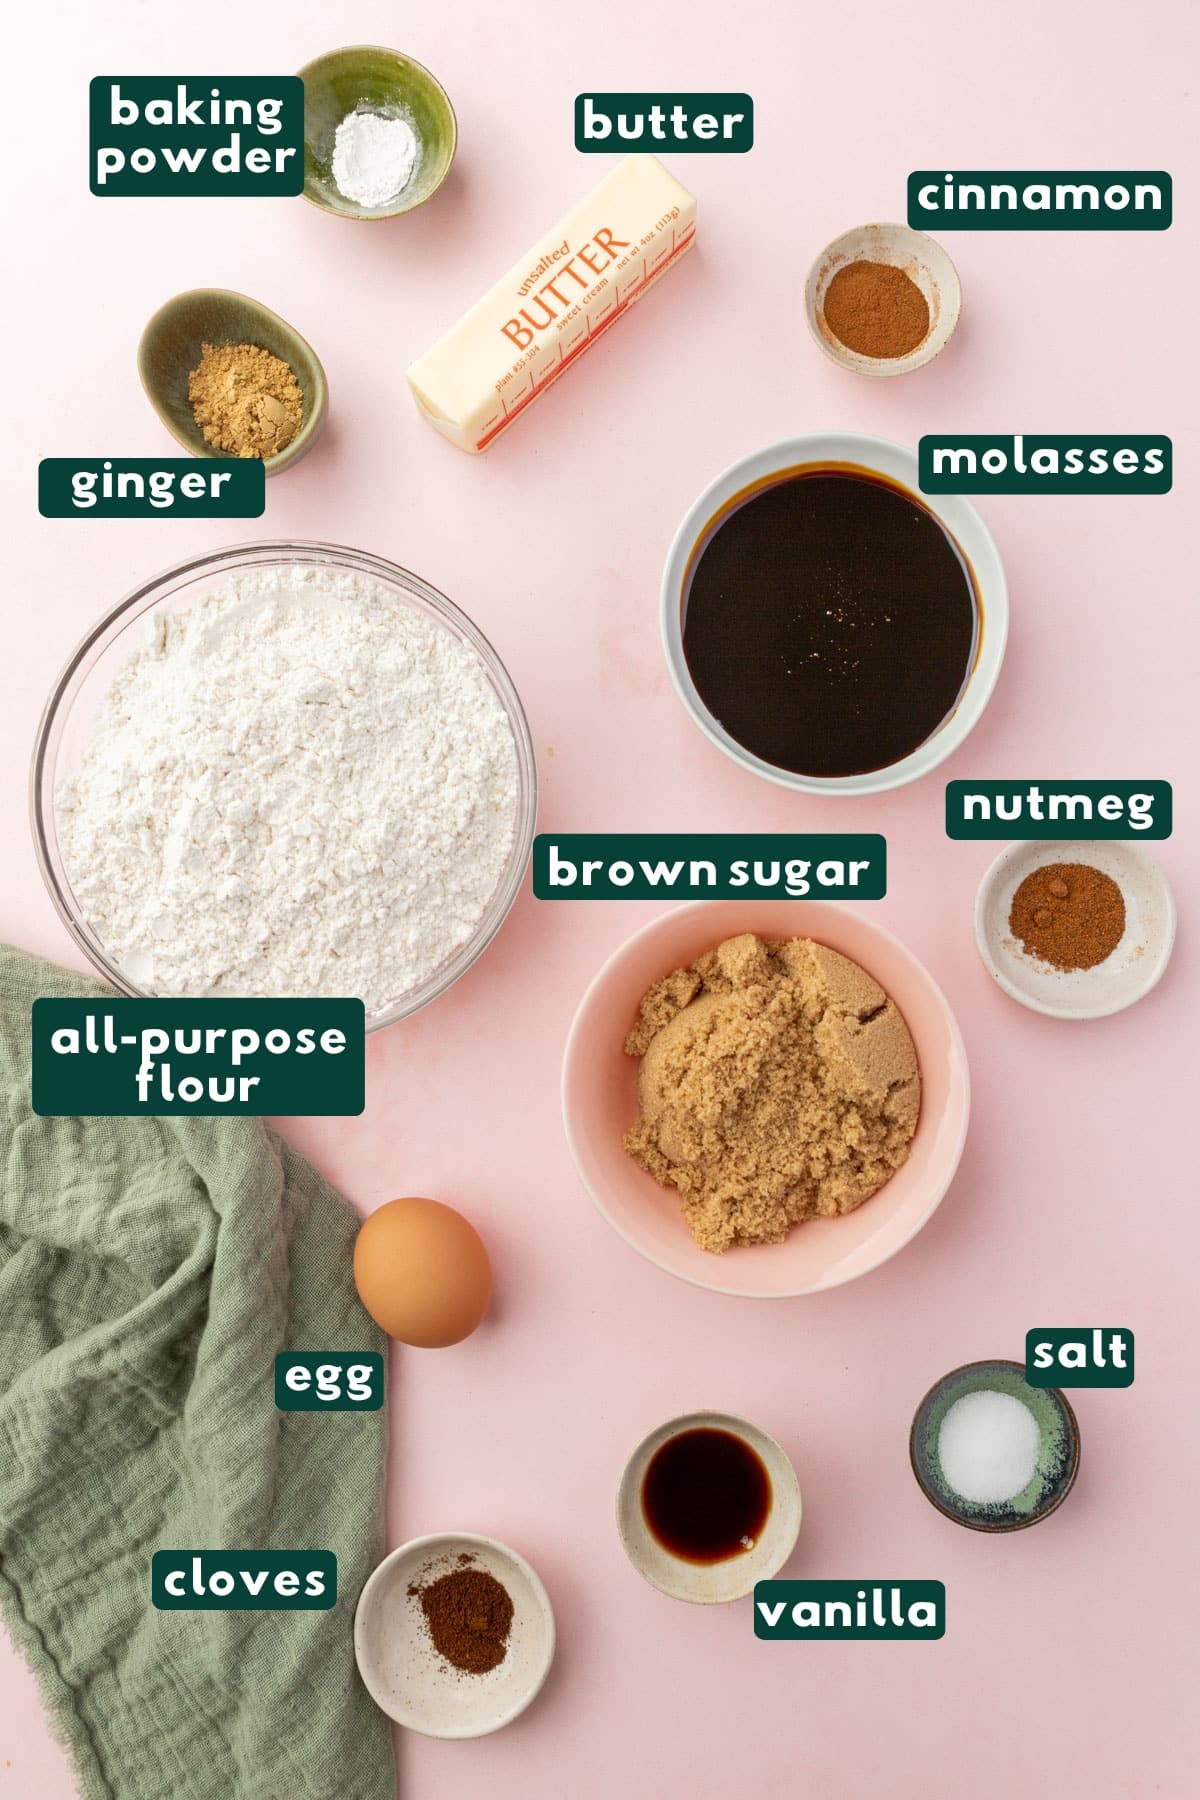 Ingredients in small bowls to make gingerbread cookies, including molasses, ginger, baking powder, butter, cinnamon, nutmeg, cloves, eggs, salt, brown sugar, flour, and vanilla with text overlays over each ingredient.